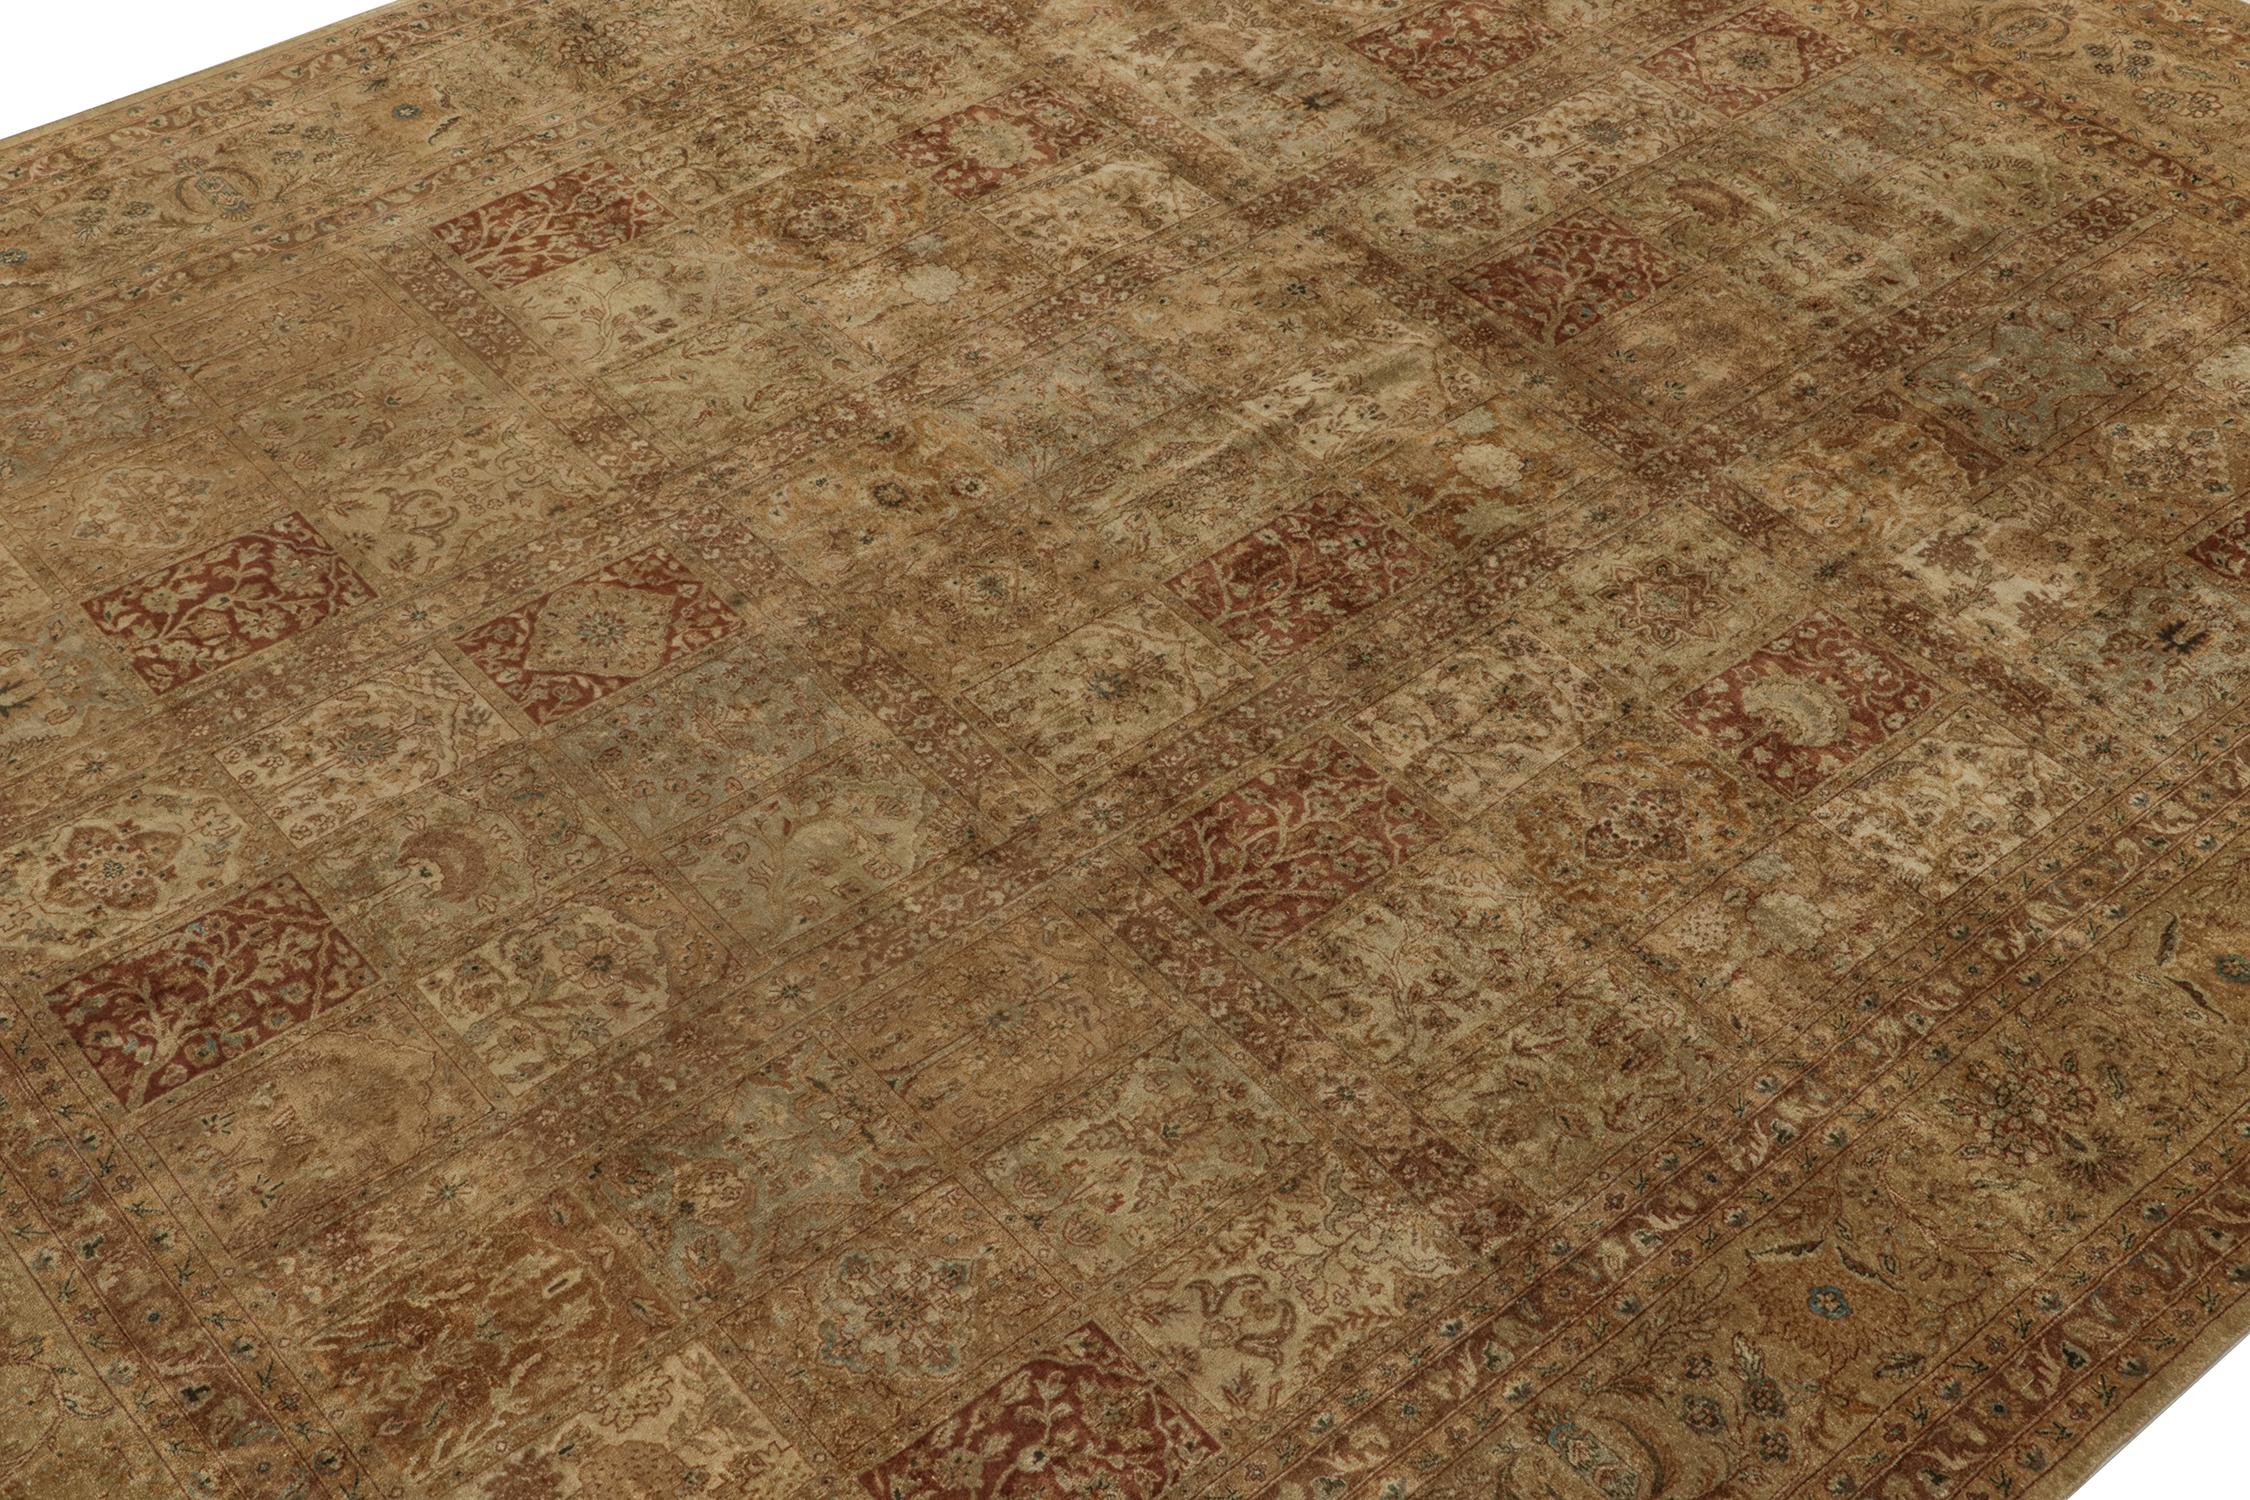 Hand-Knotted Rug & Kilim’s Classic Persian Style Rug in Beige-Brown and Red Floral Patterns